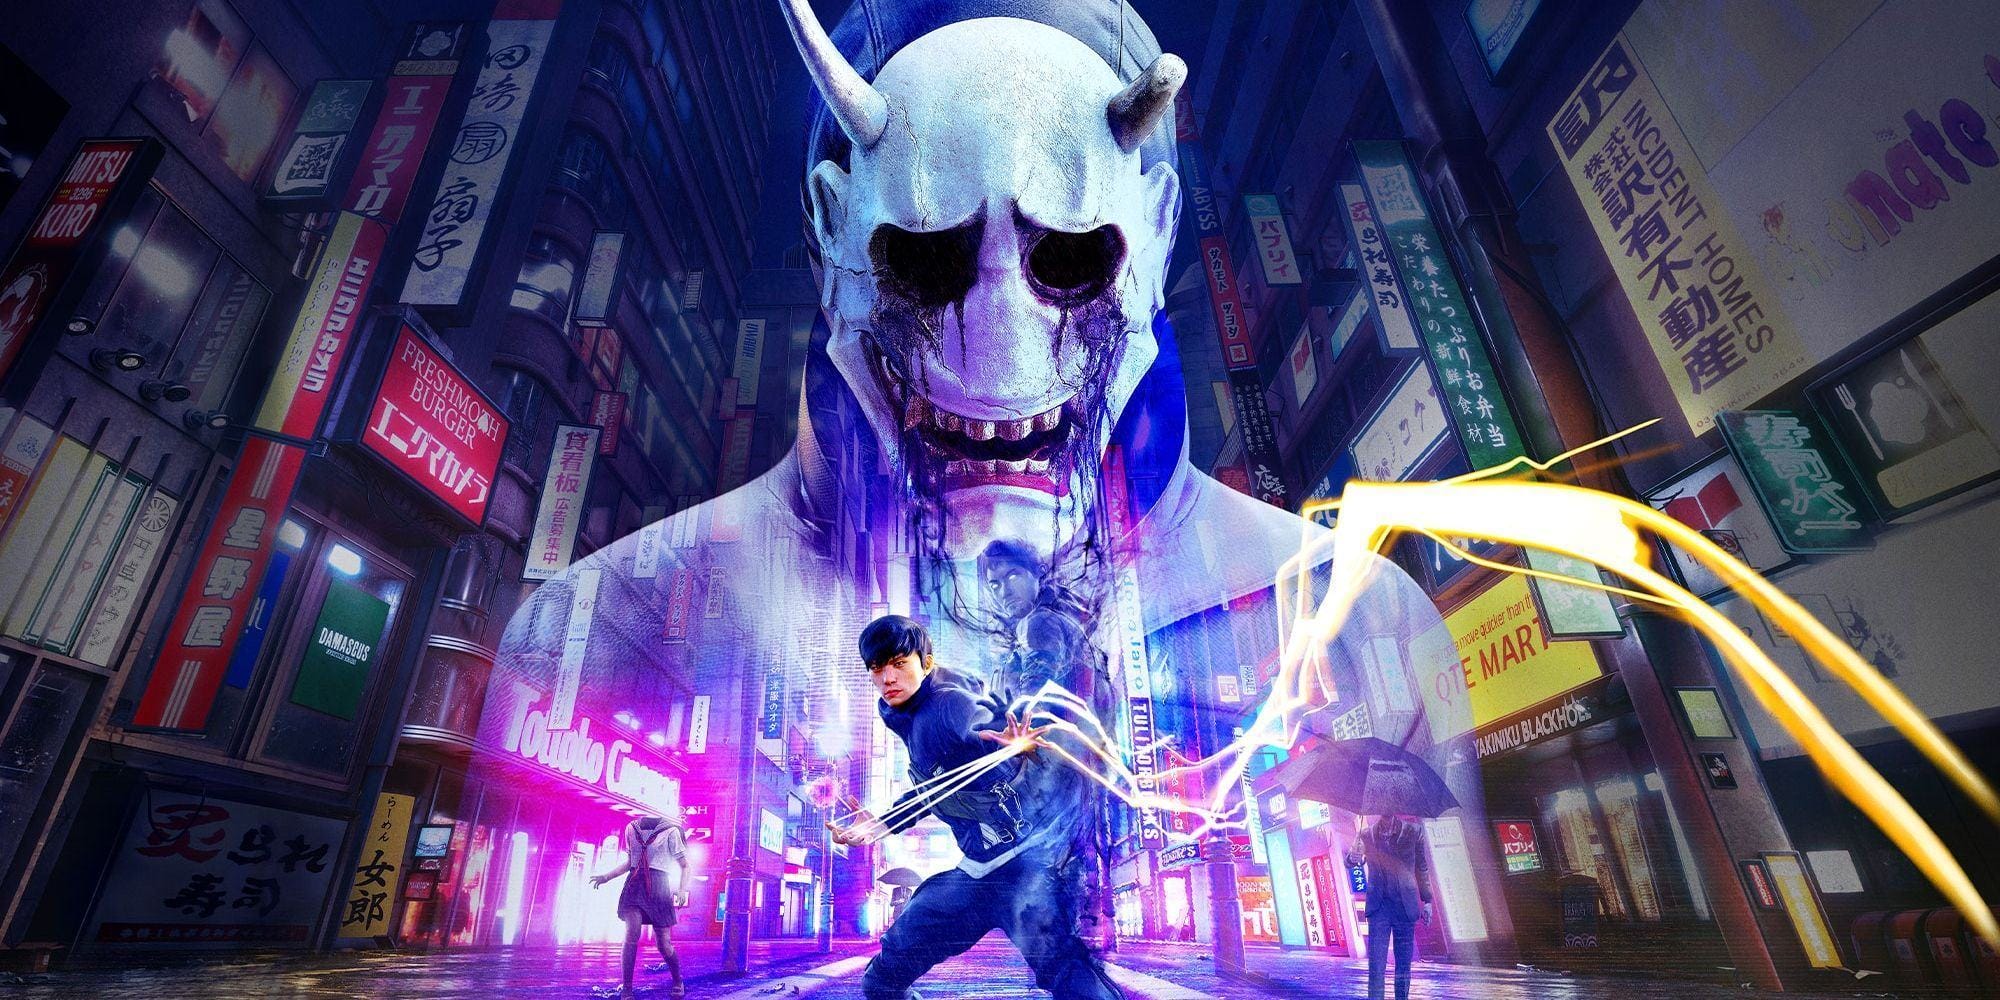 A crop of Ghostwire: Tokyo's key art, showing Hannya overlooking the neon-sign illuminated streets of Shibuya as Akito uses his abilities as a few Visitor opponents surround him.